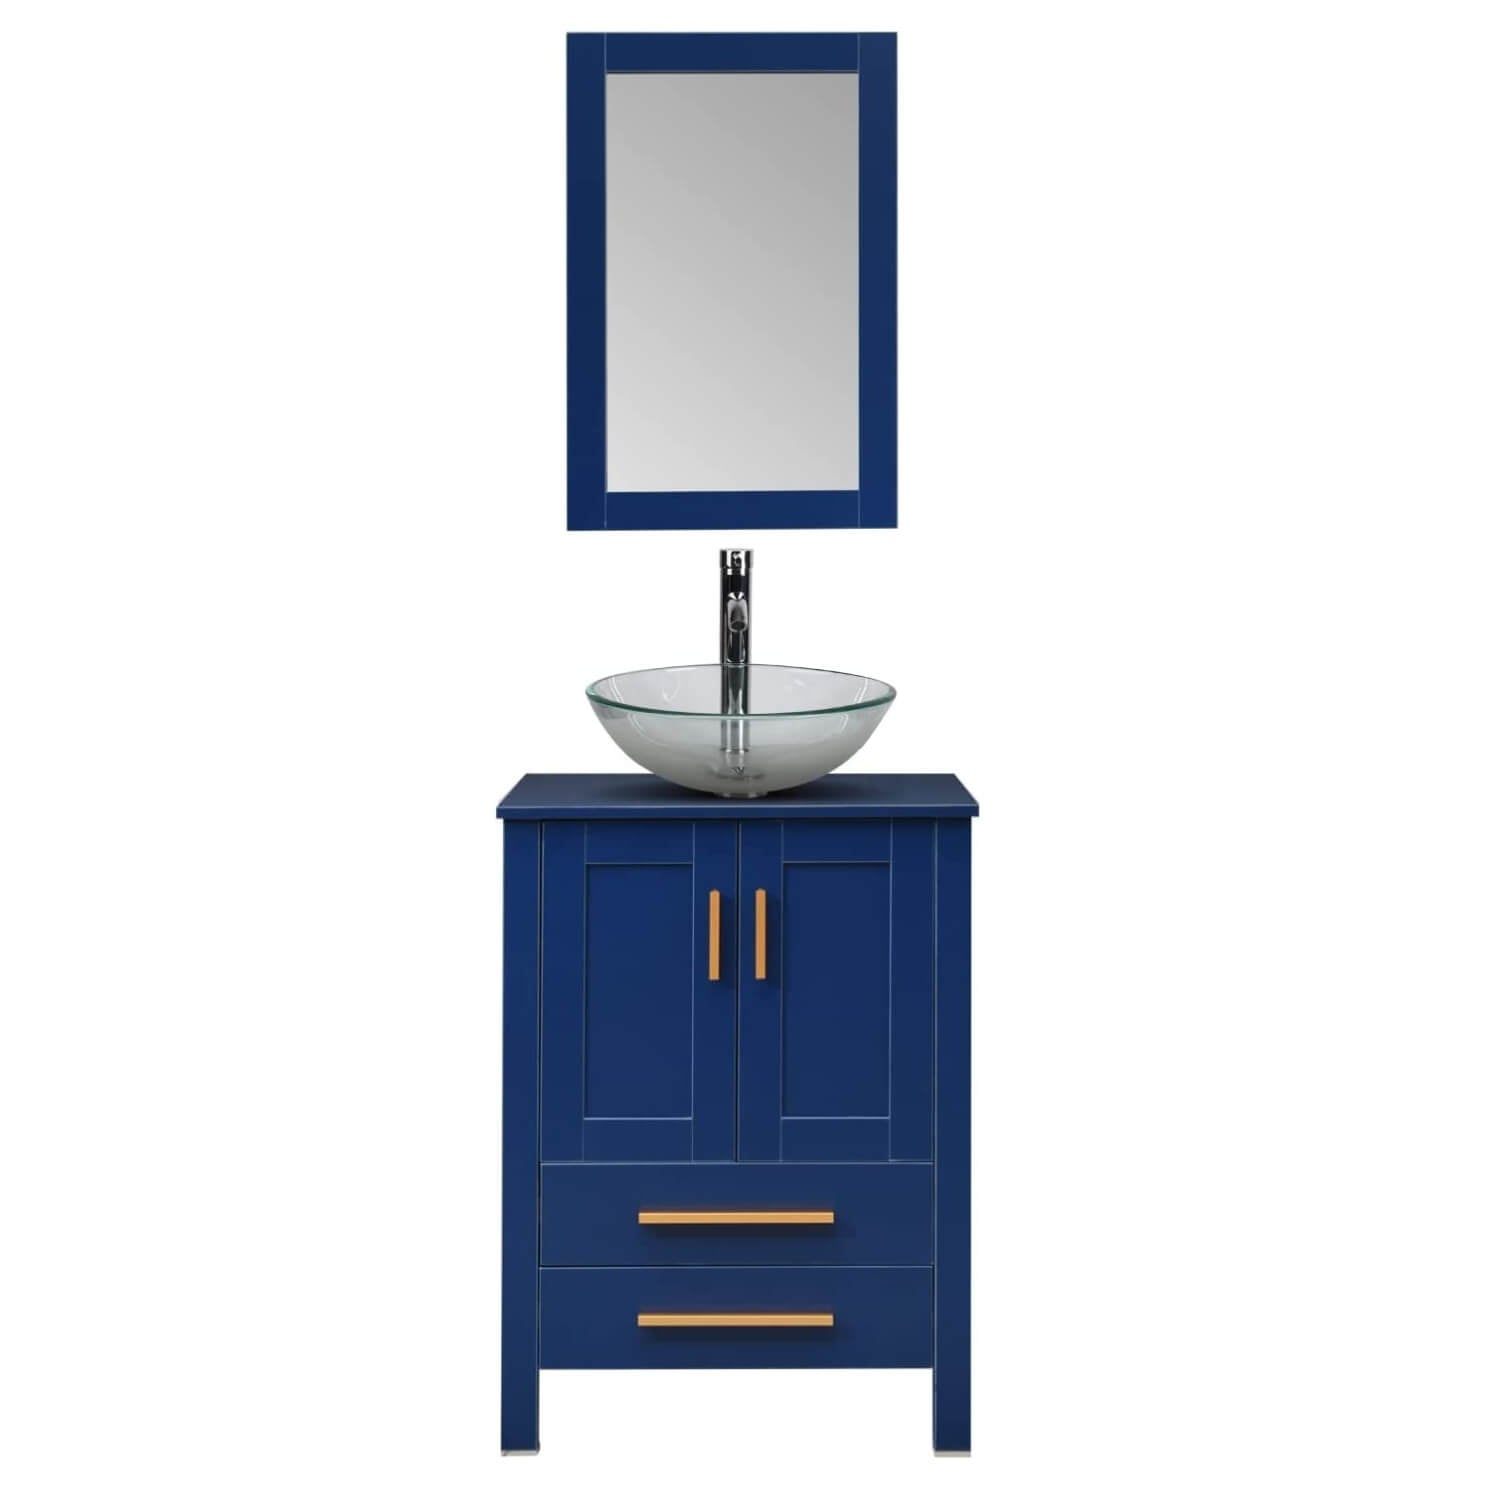 Elecwish 24'' bathroom wood with clear glass sink set stand pedestal cabinet with mirror